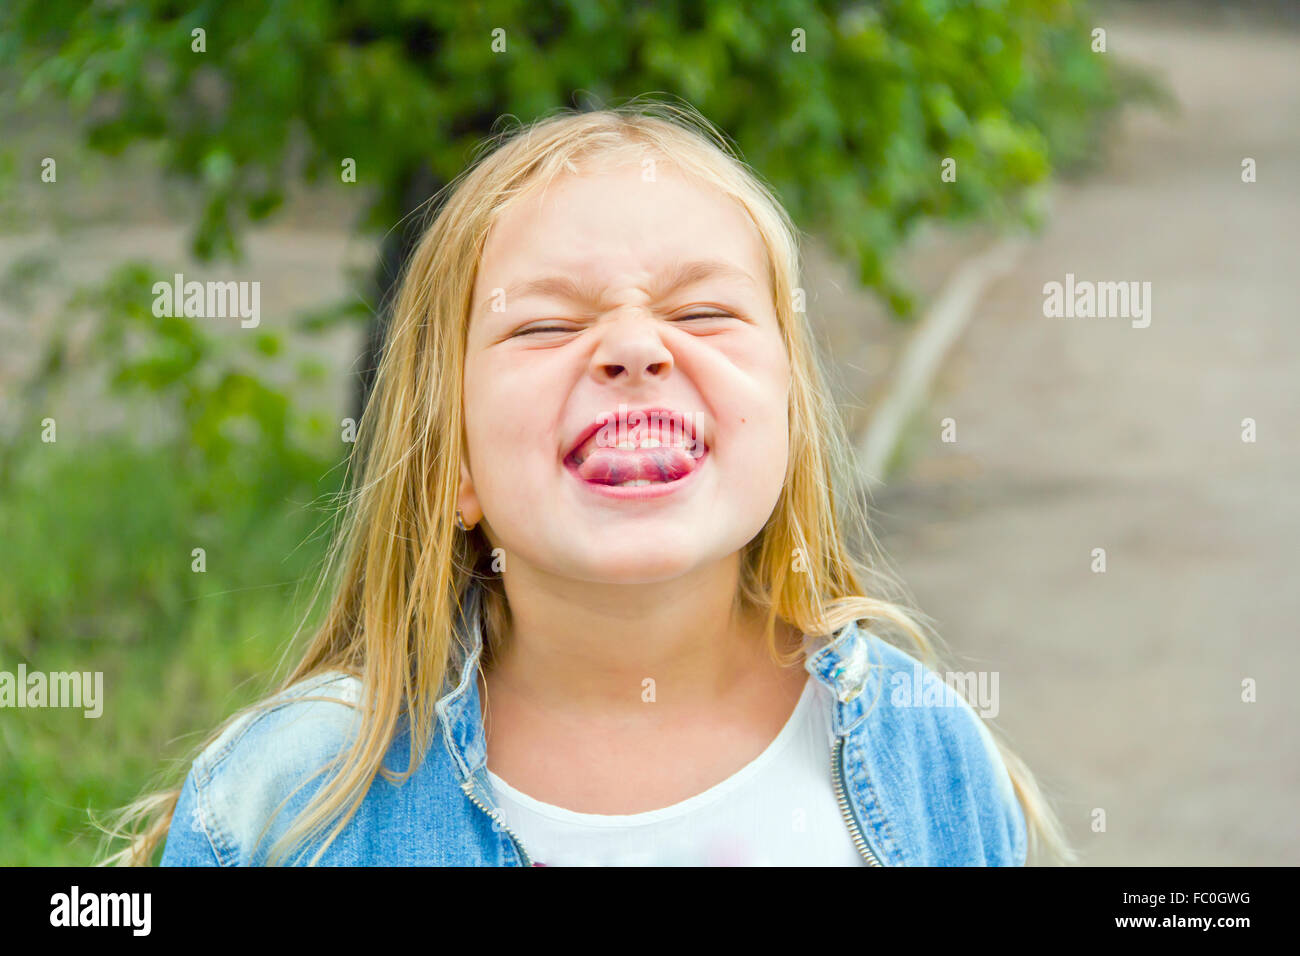 Girl makes faces imitate witch Stock Photo